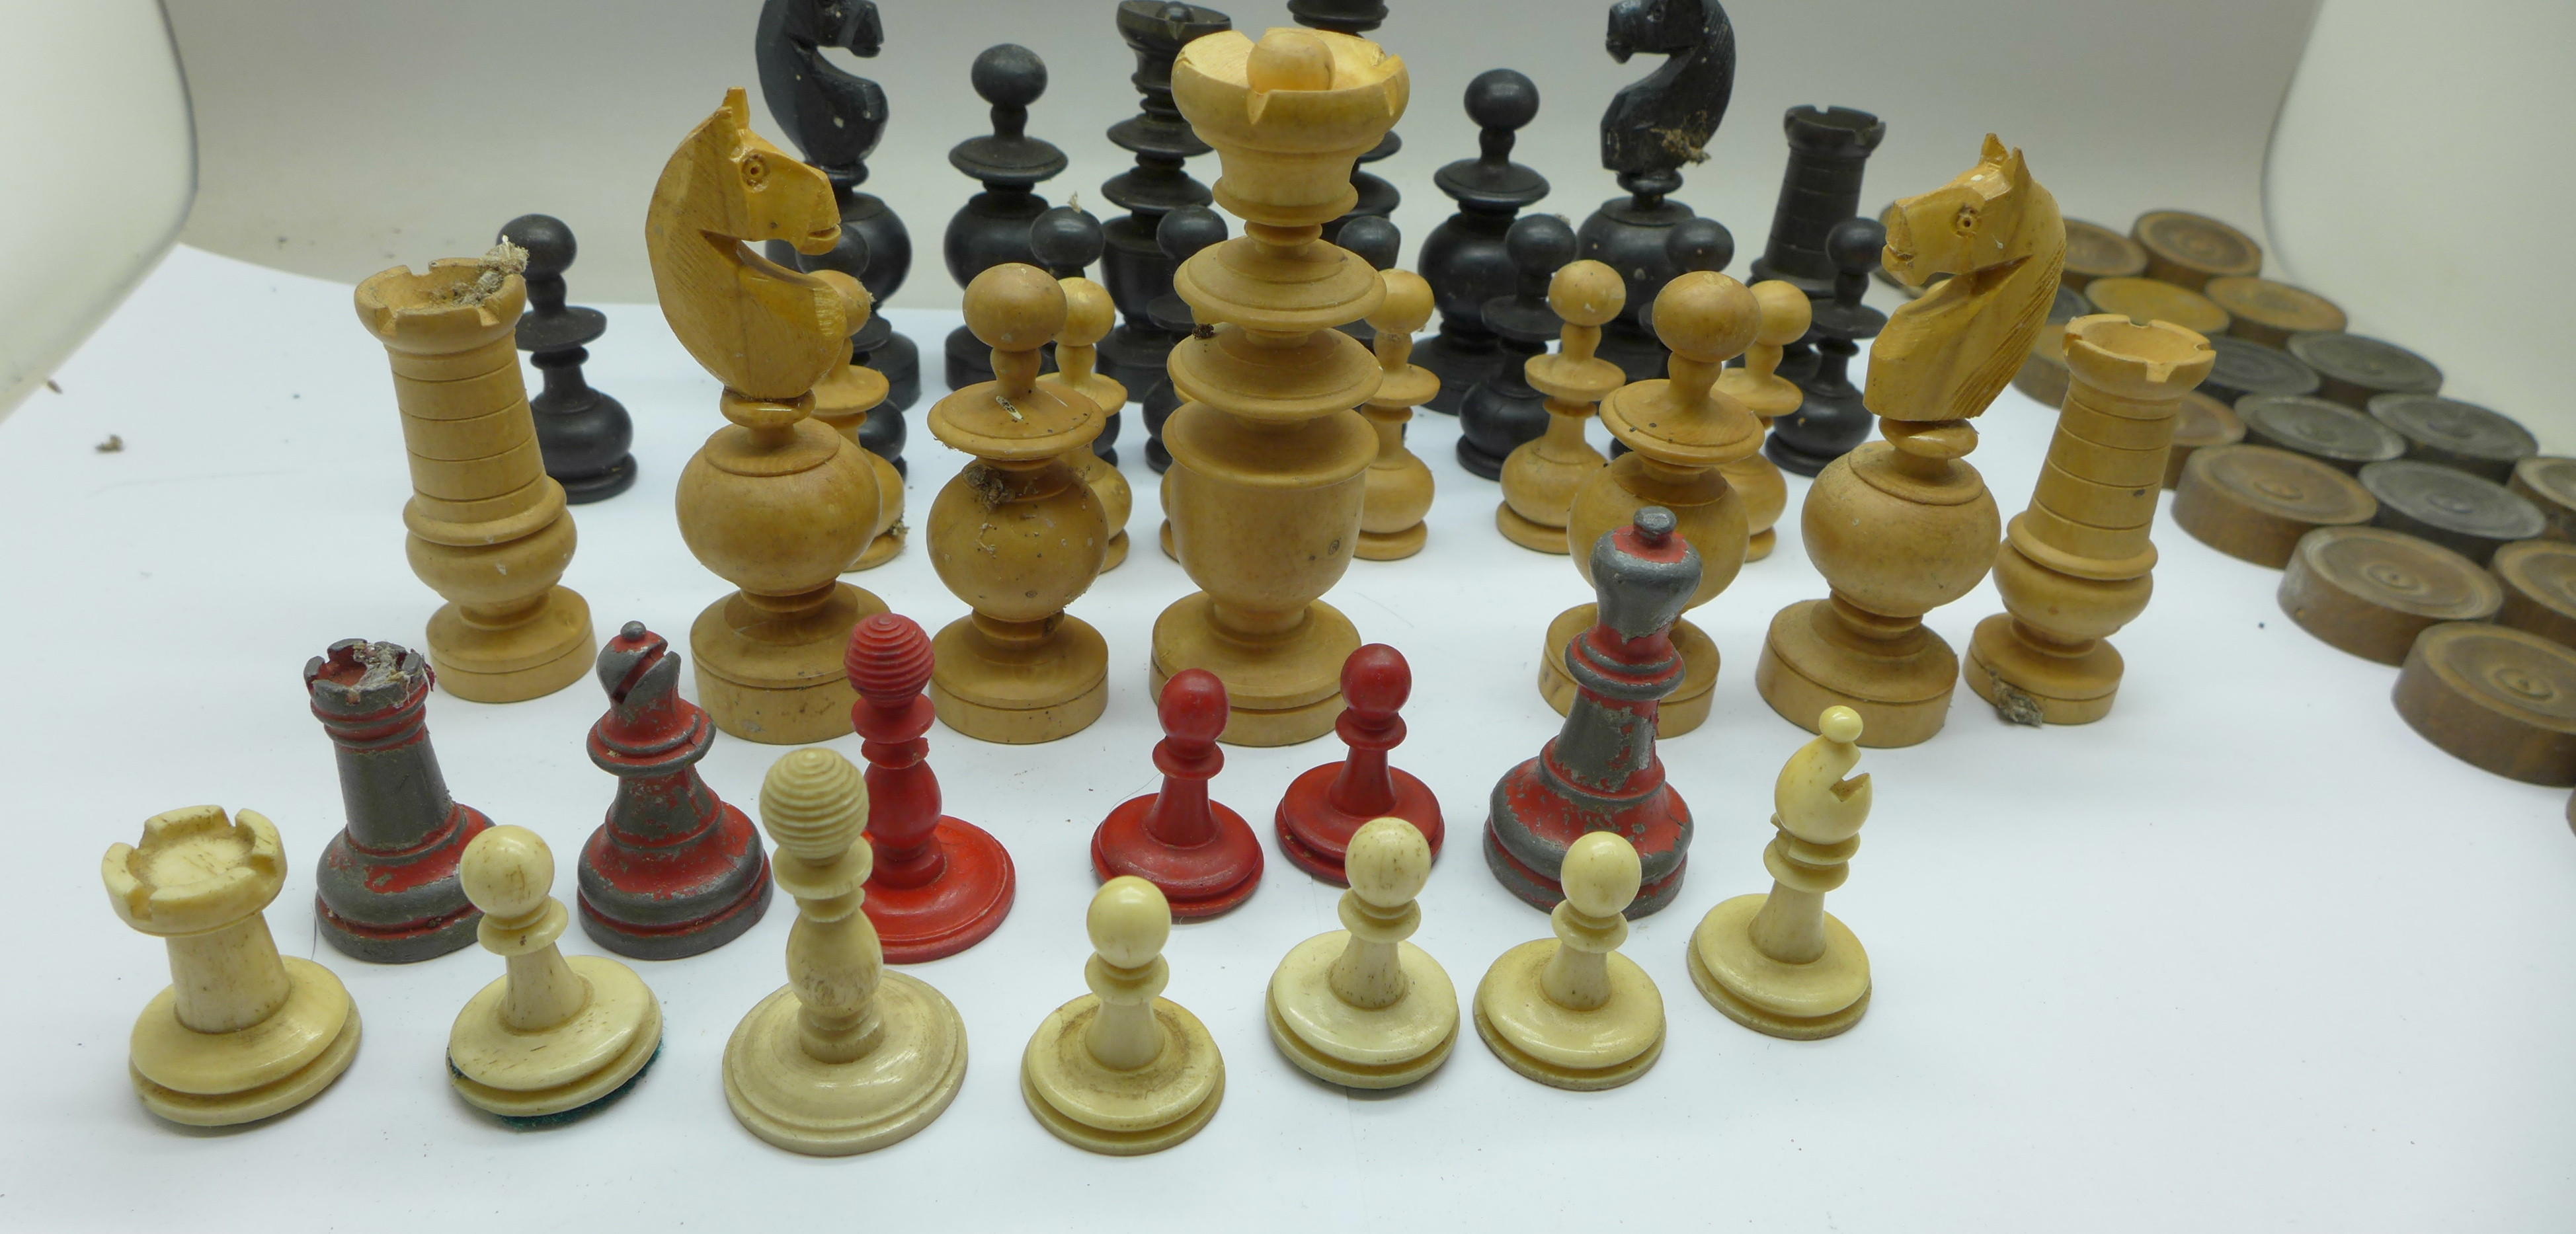 Chess and draughts pieces, incomplete sets - Image 3 of 3